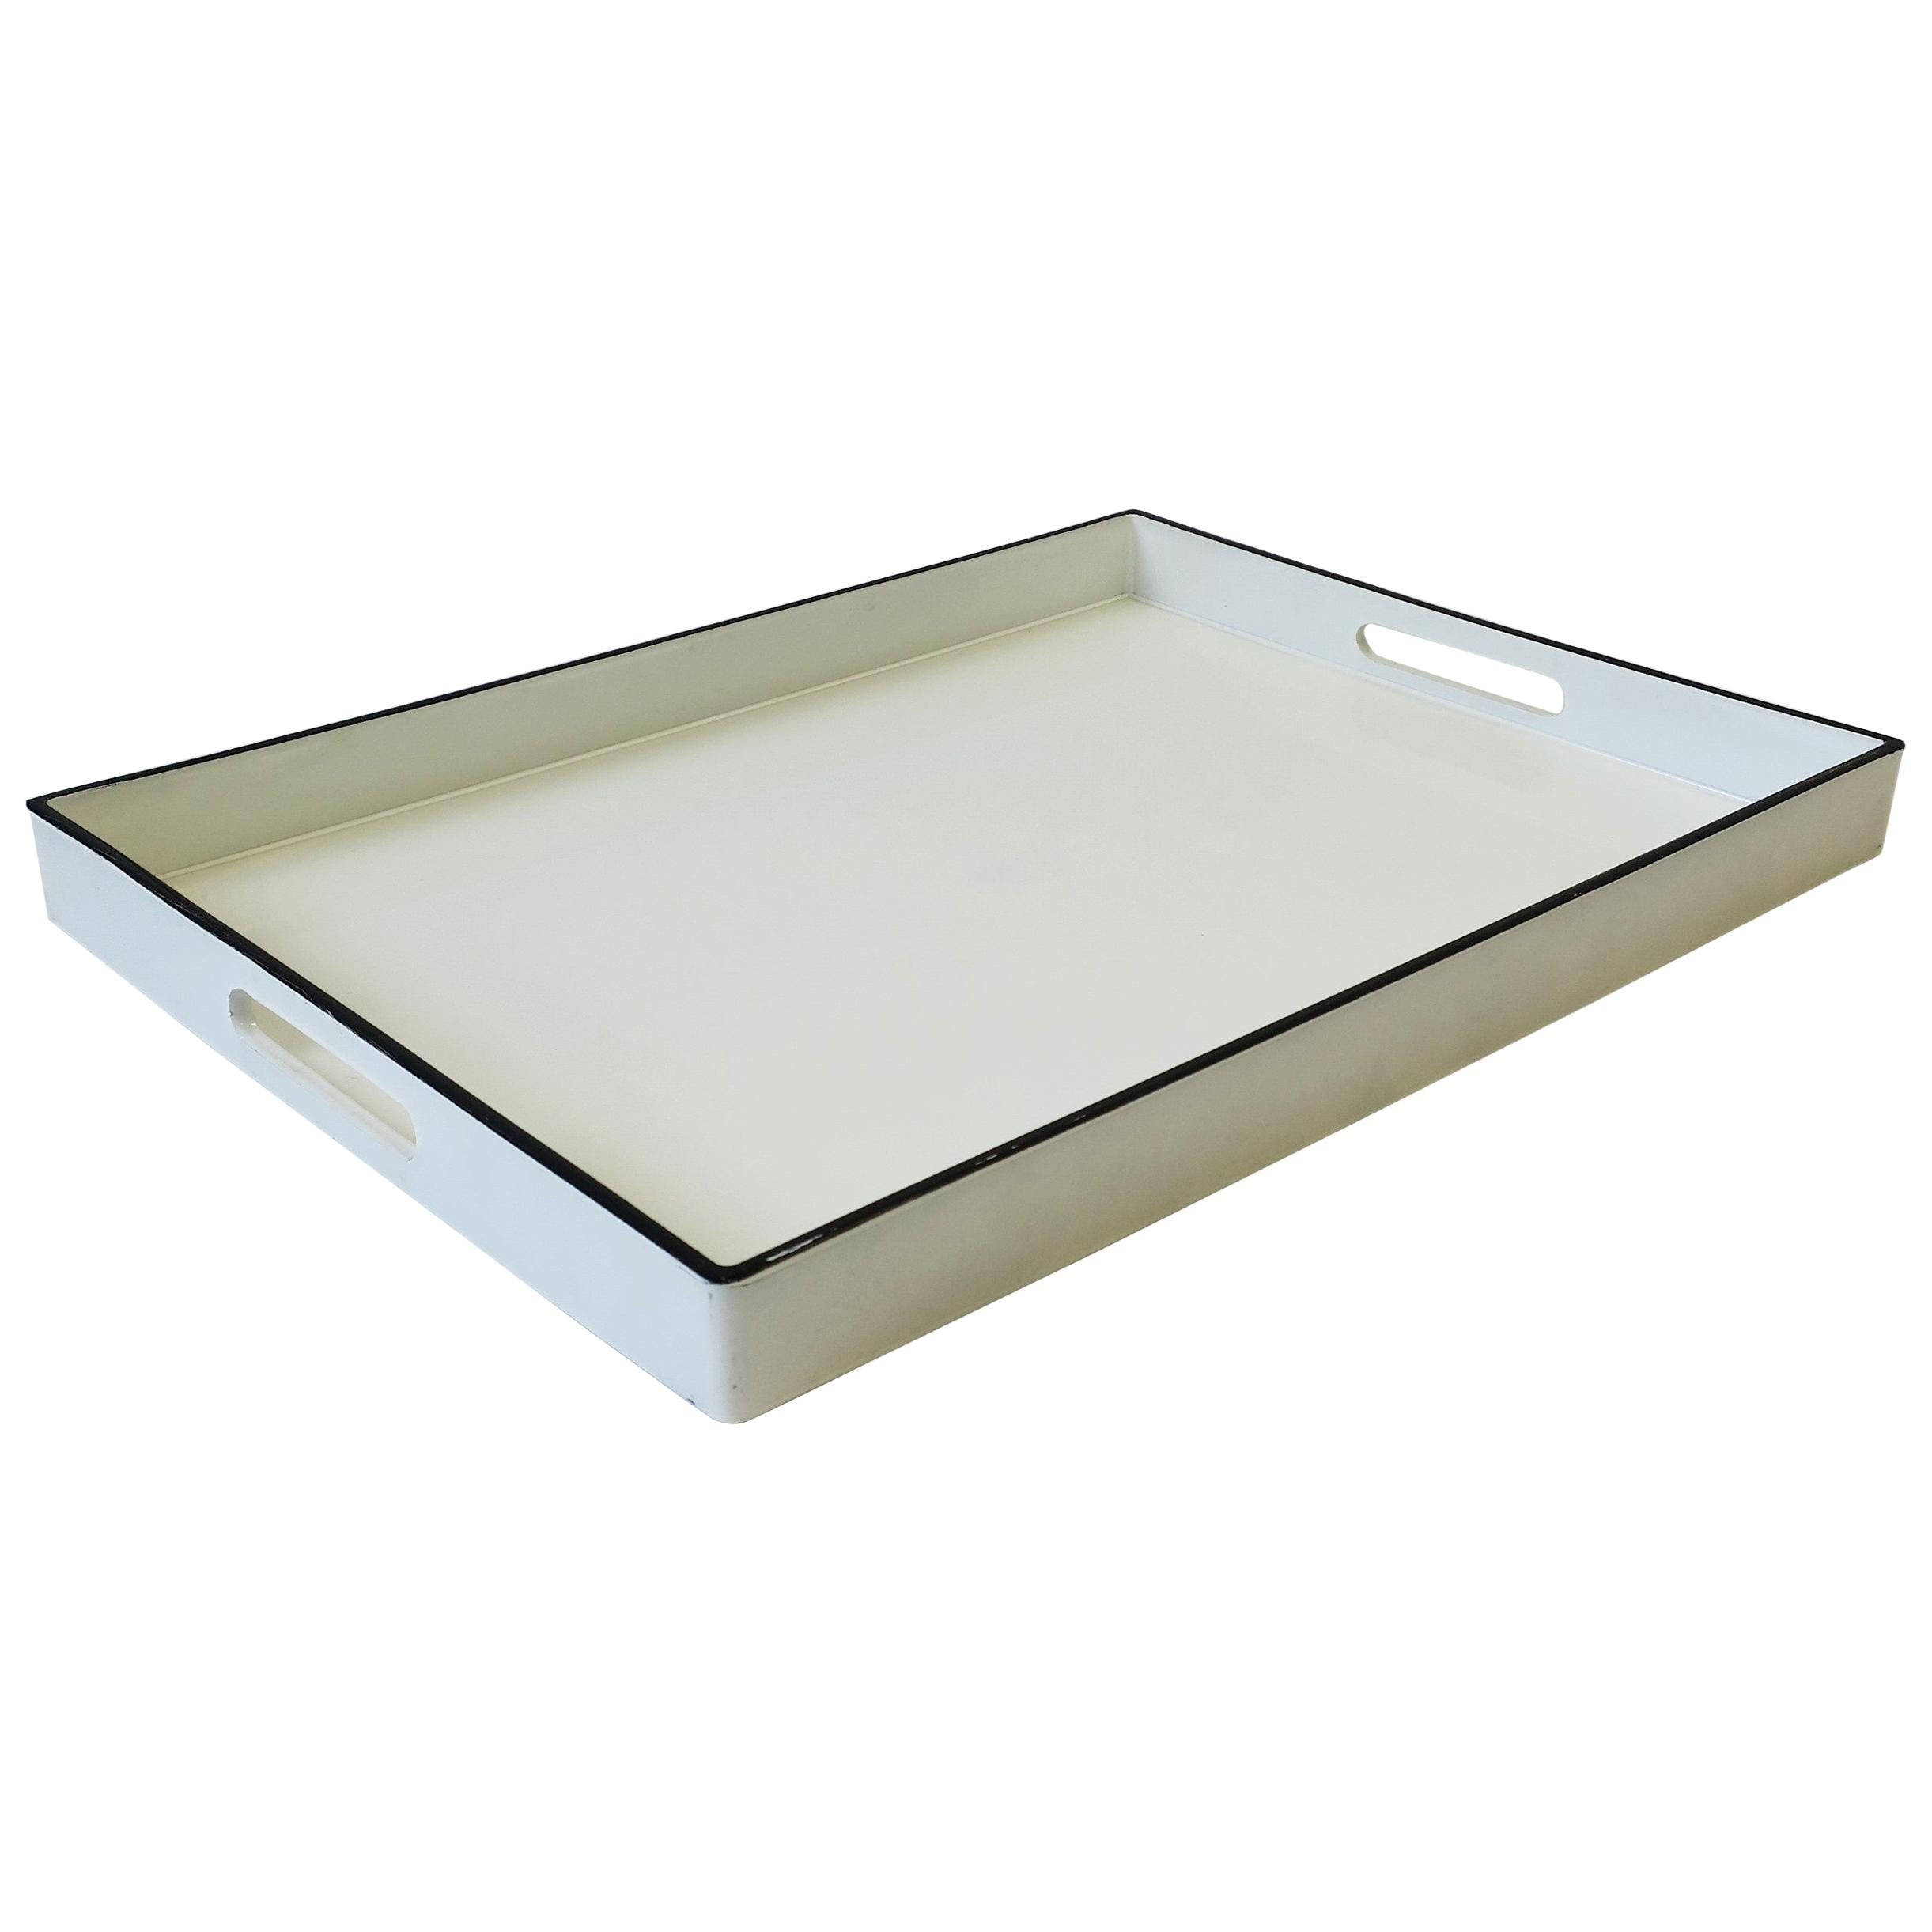 Black and White Lacquer Serving Tray